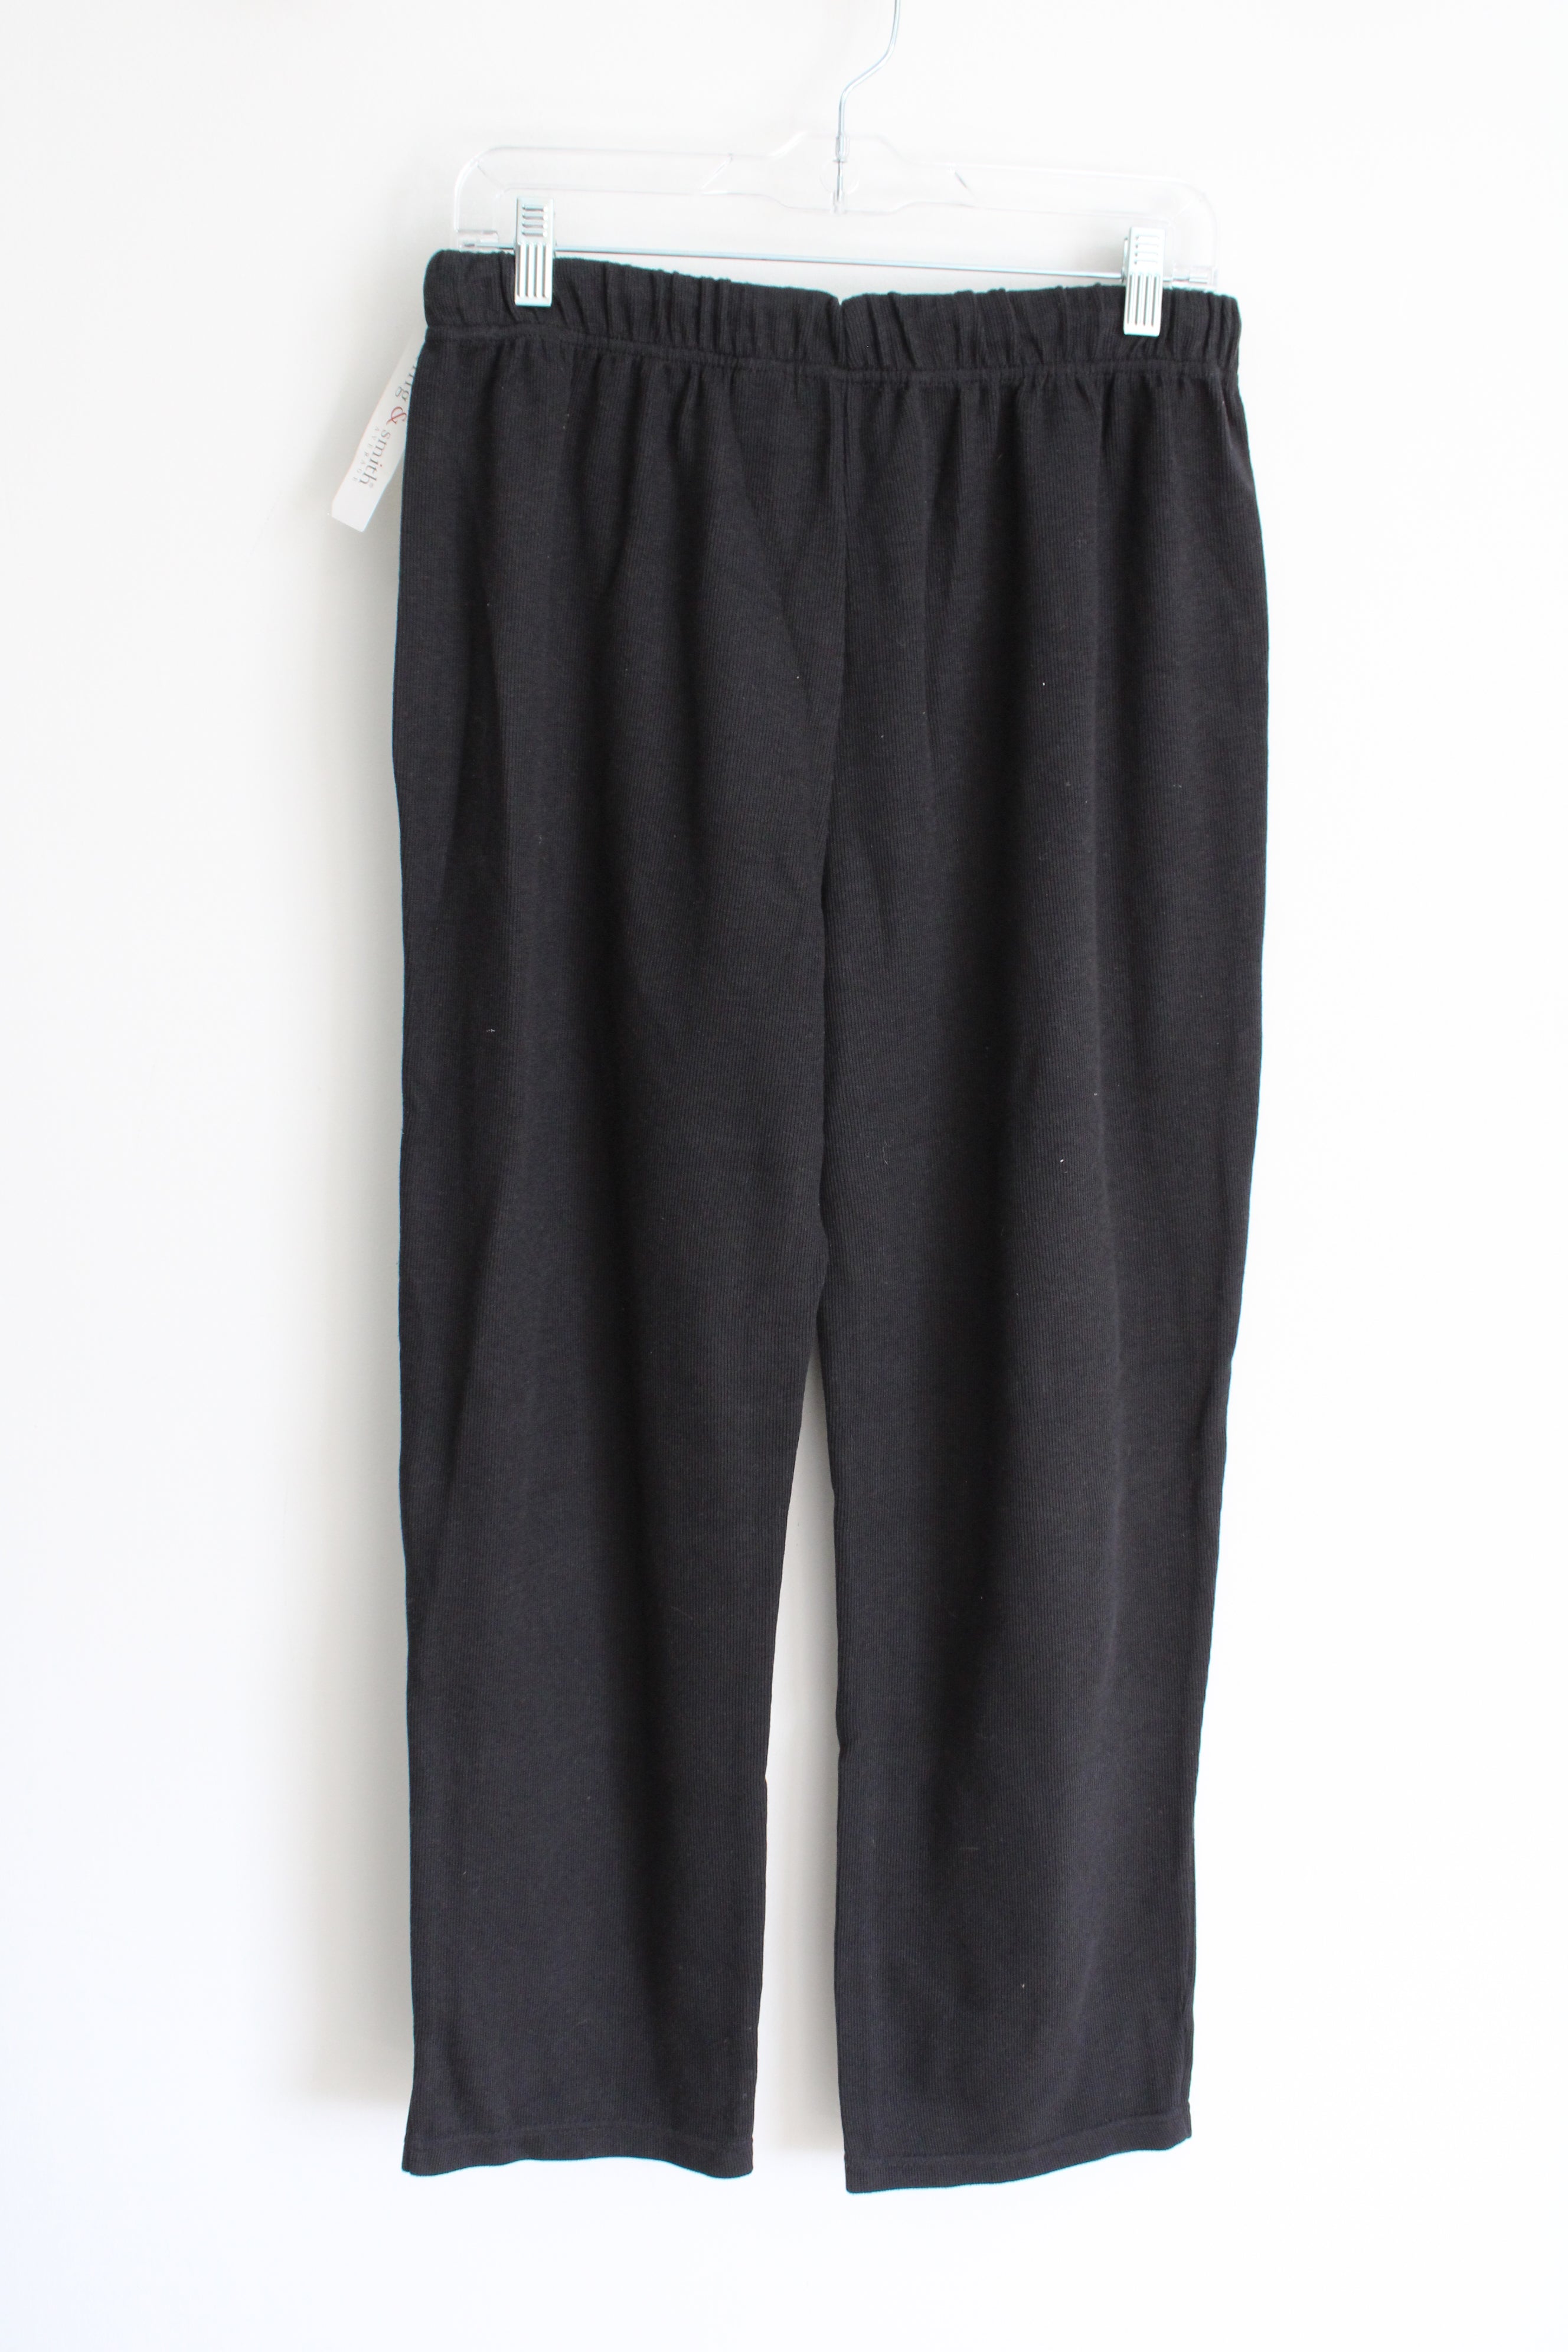 NEW Hasting & Smith Black Knit Pants | M